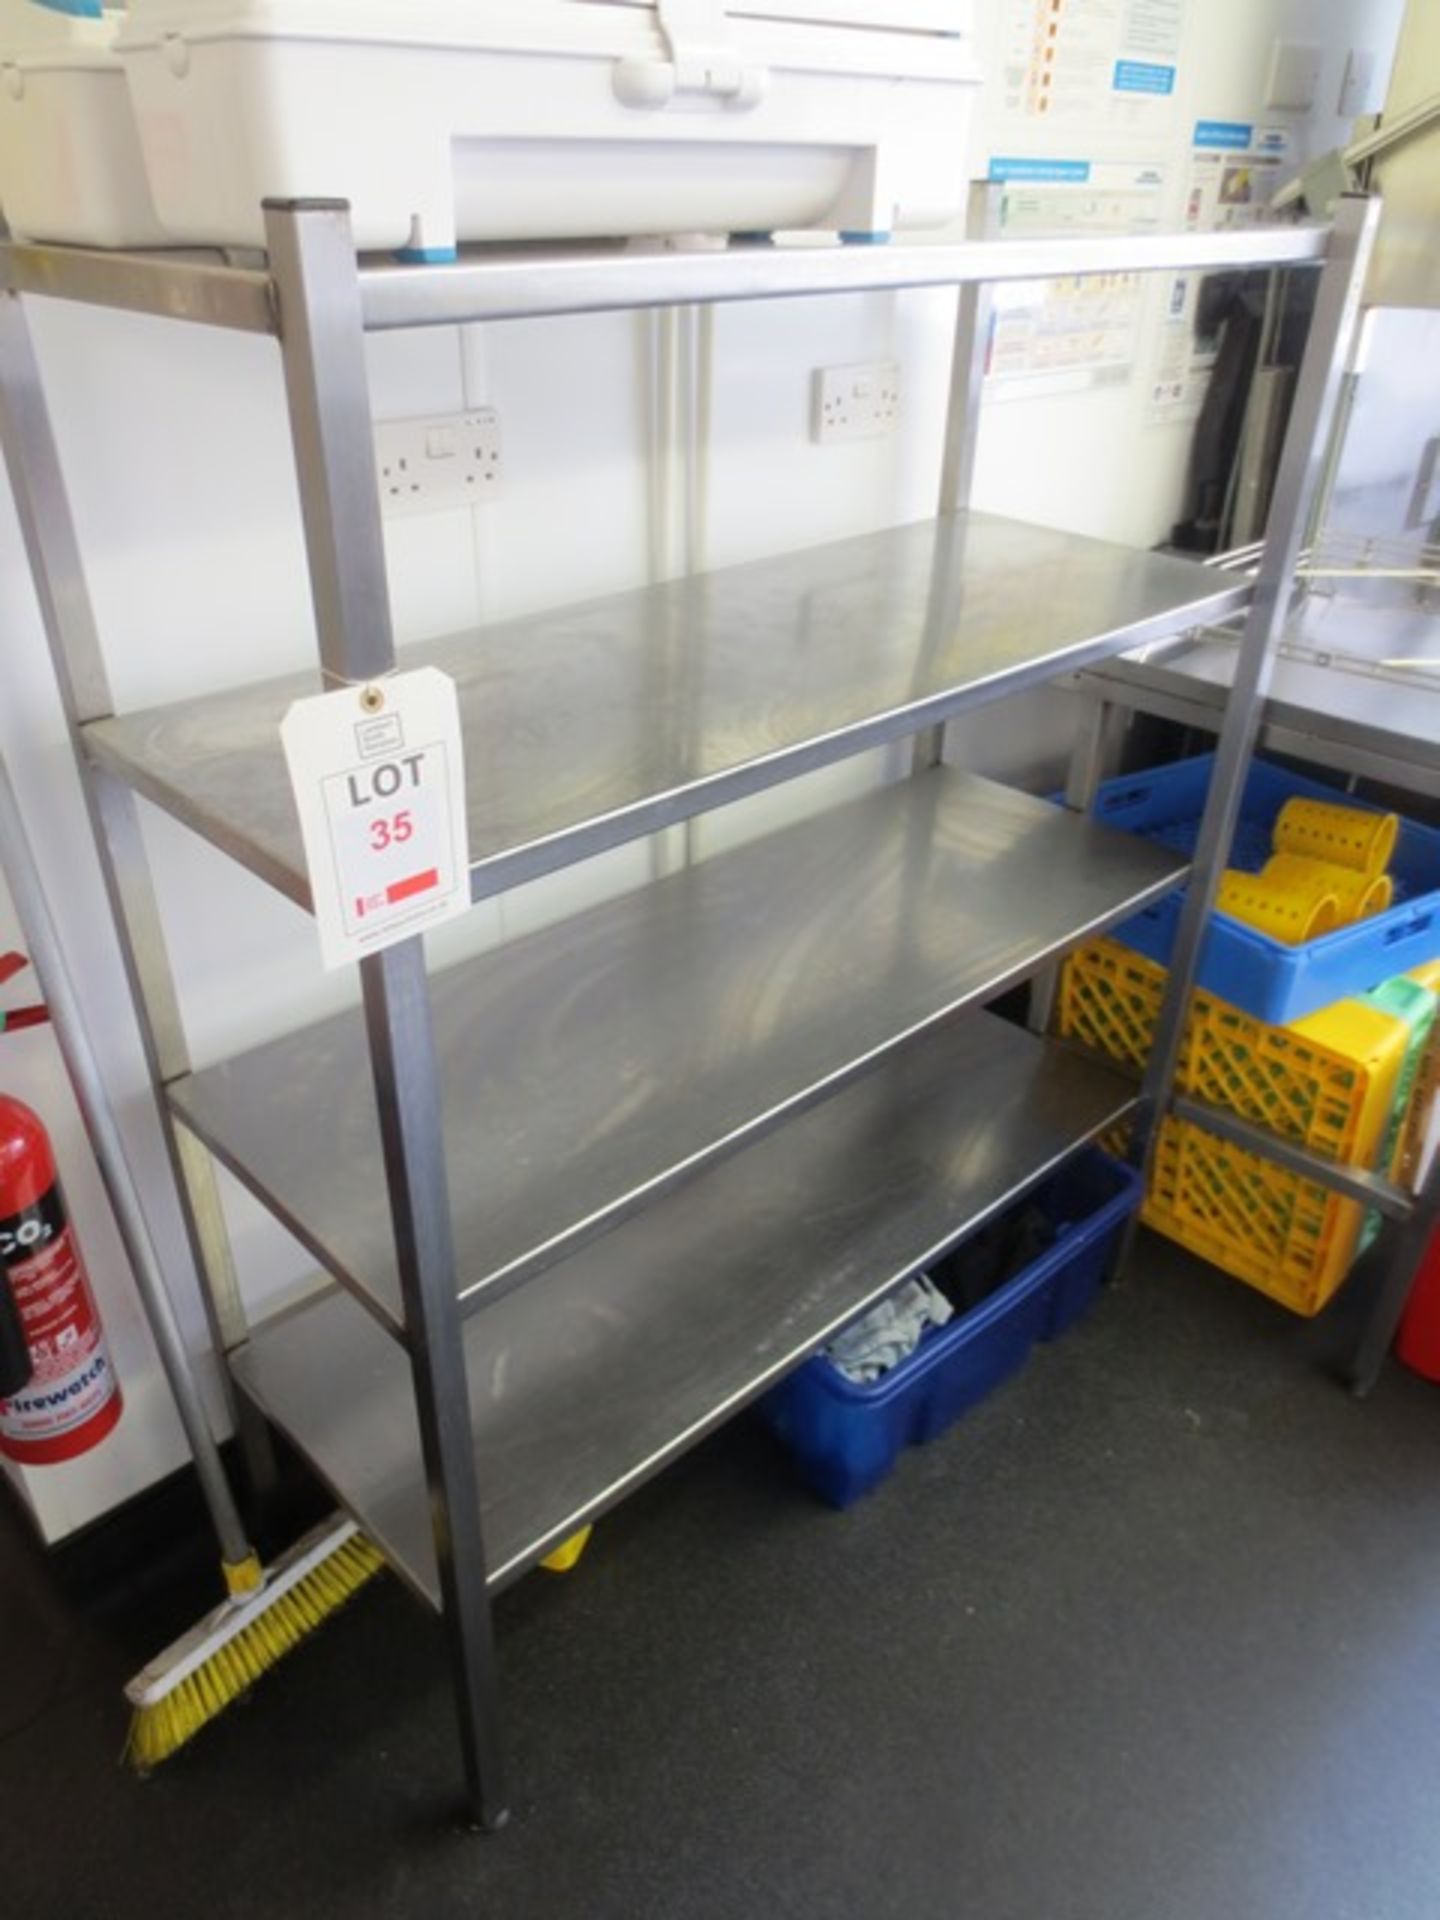 Aluminium 4 tier storage rack, approx dimensions: 1150 x 470 x 1400mm (excludes contents)